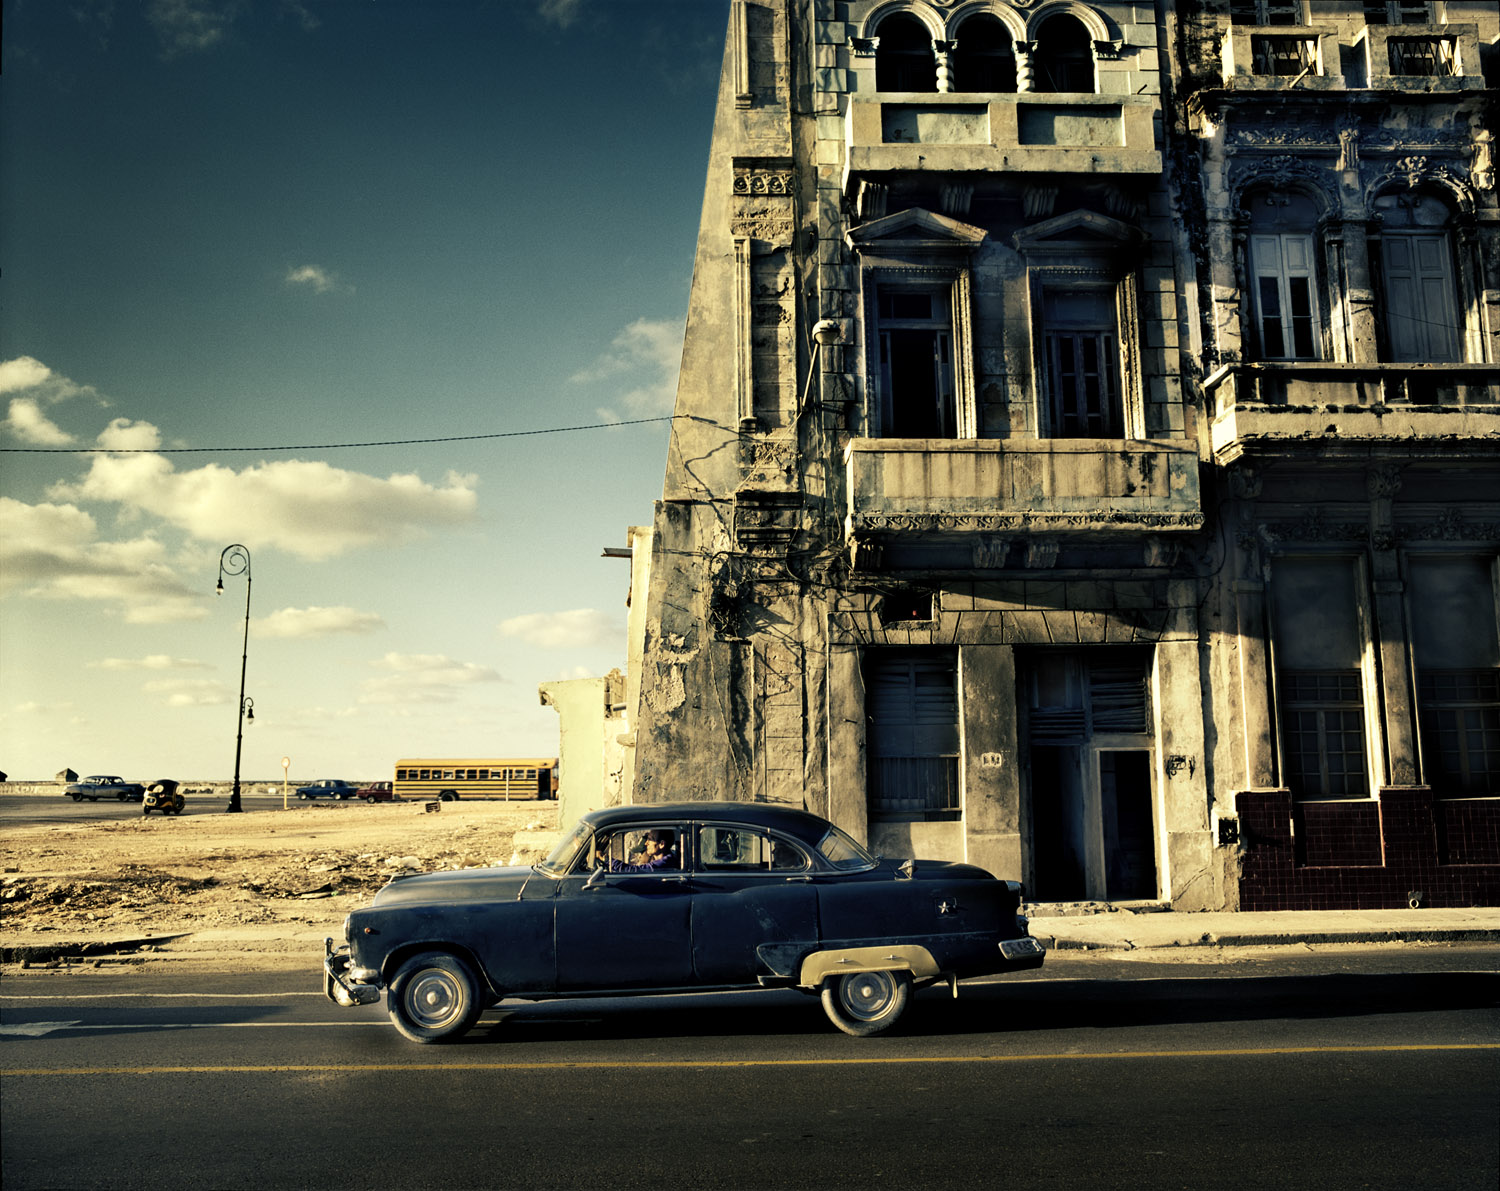 Outside Havana, an old American car with a new Japanese engine is used as a taxi.